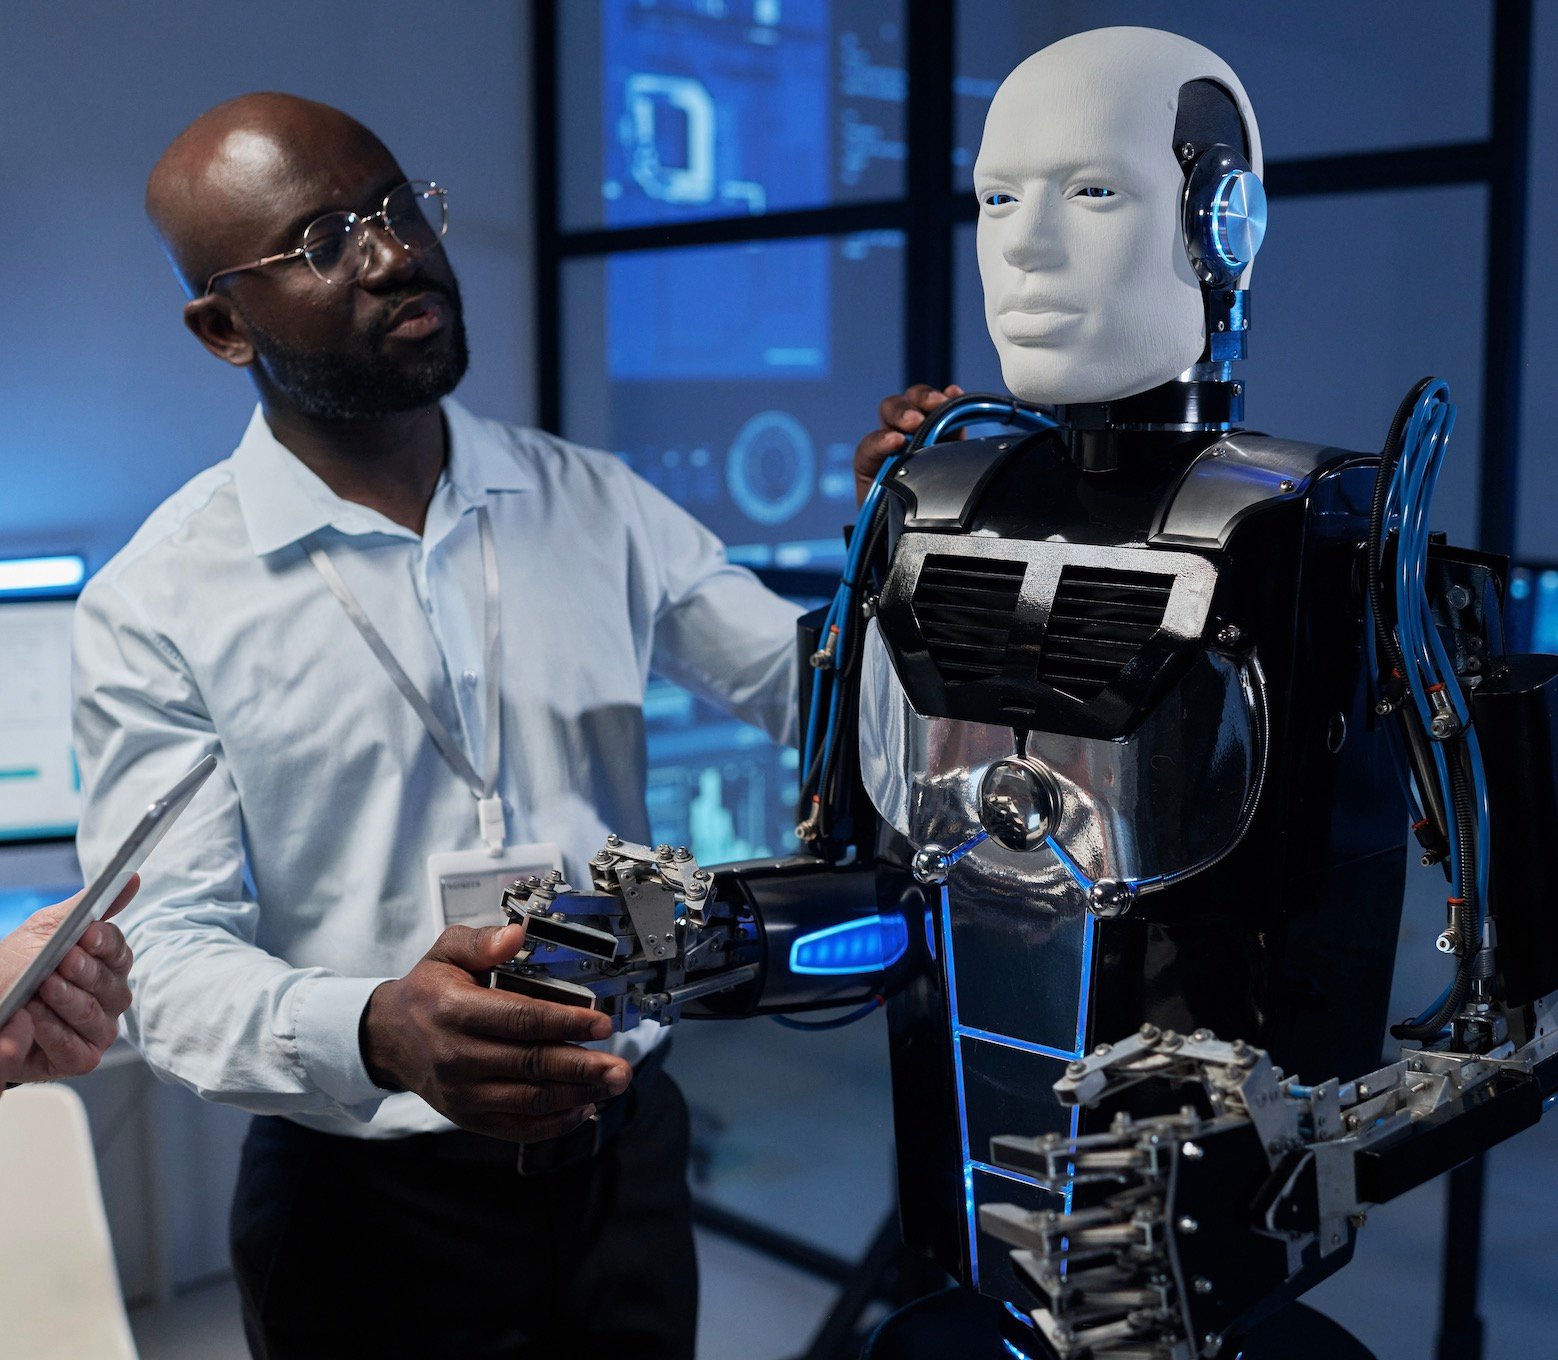 Where to study Robotics Courses in South Africa